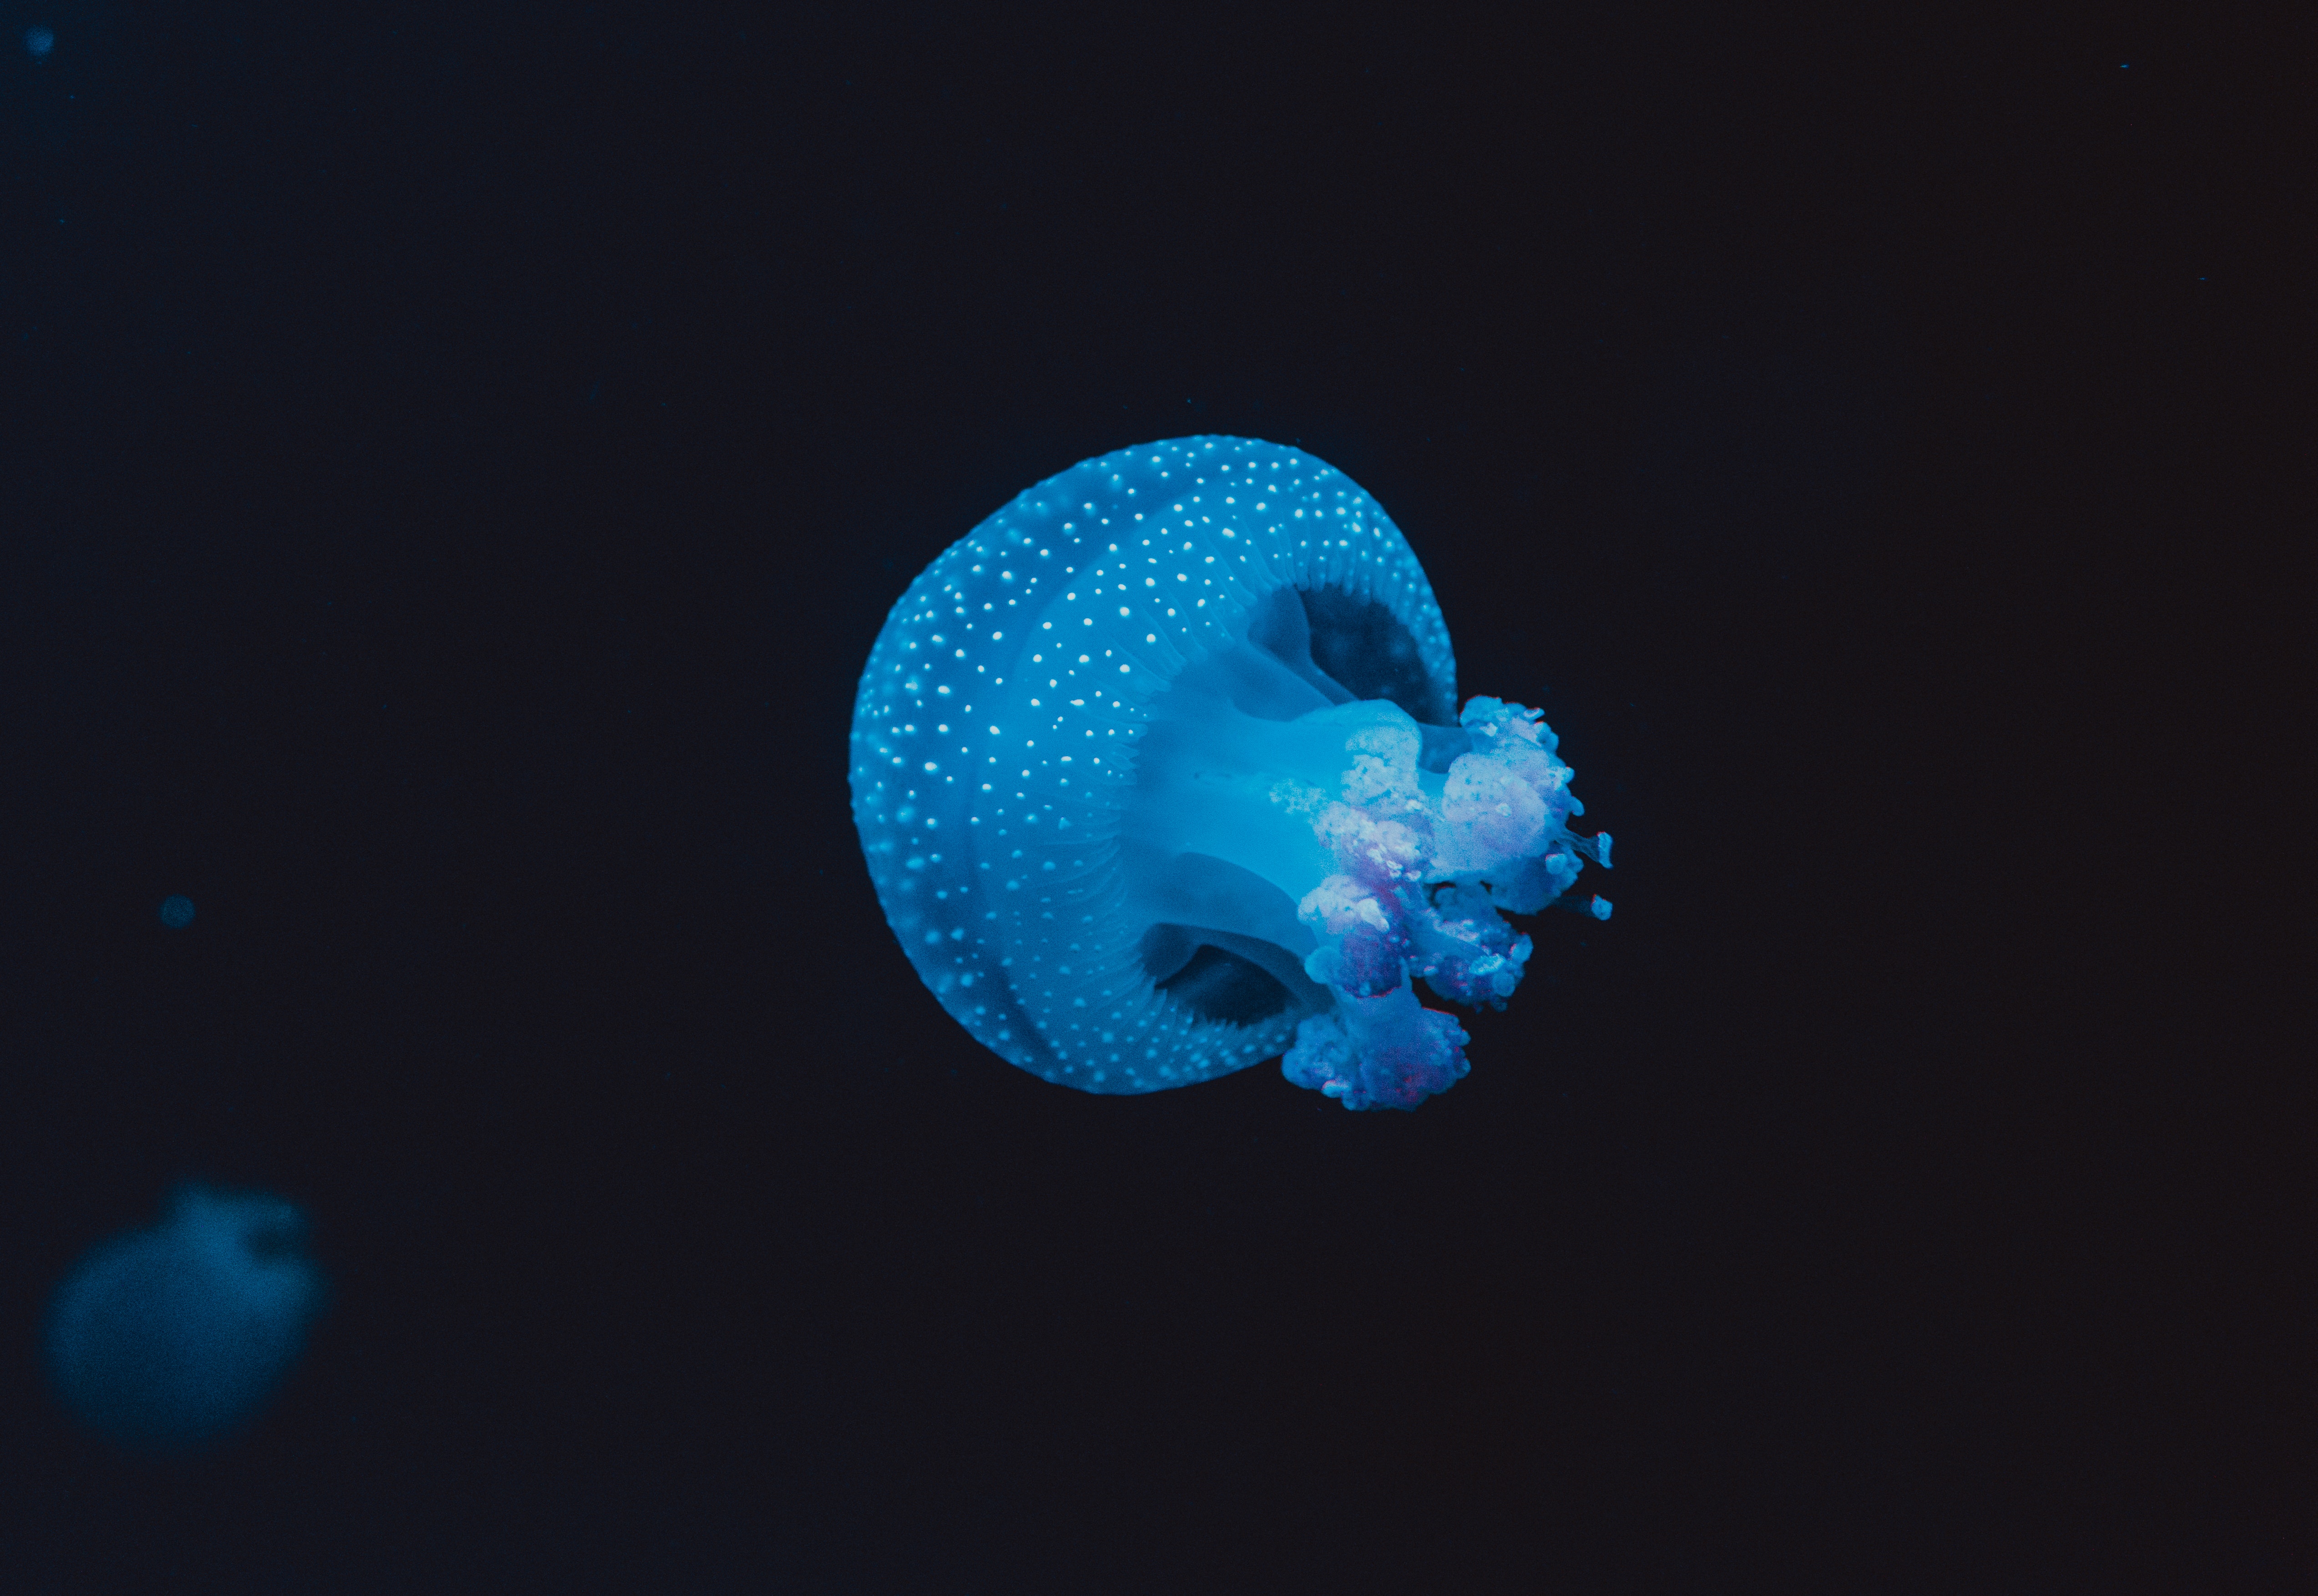 tentacles, spots, animals, jellyfish, stains, underwater world wallpaper for mobile